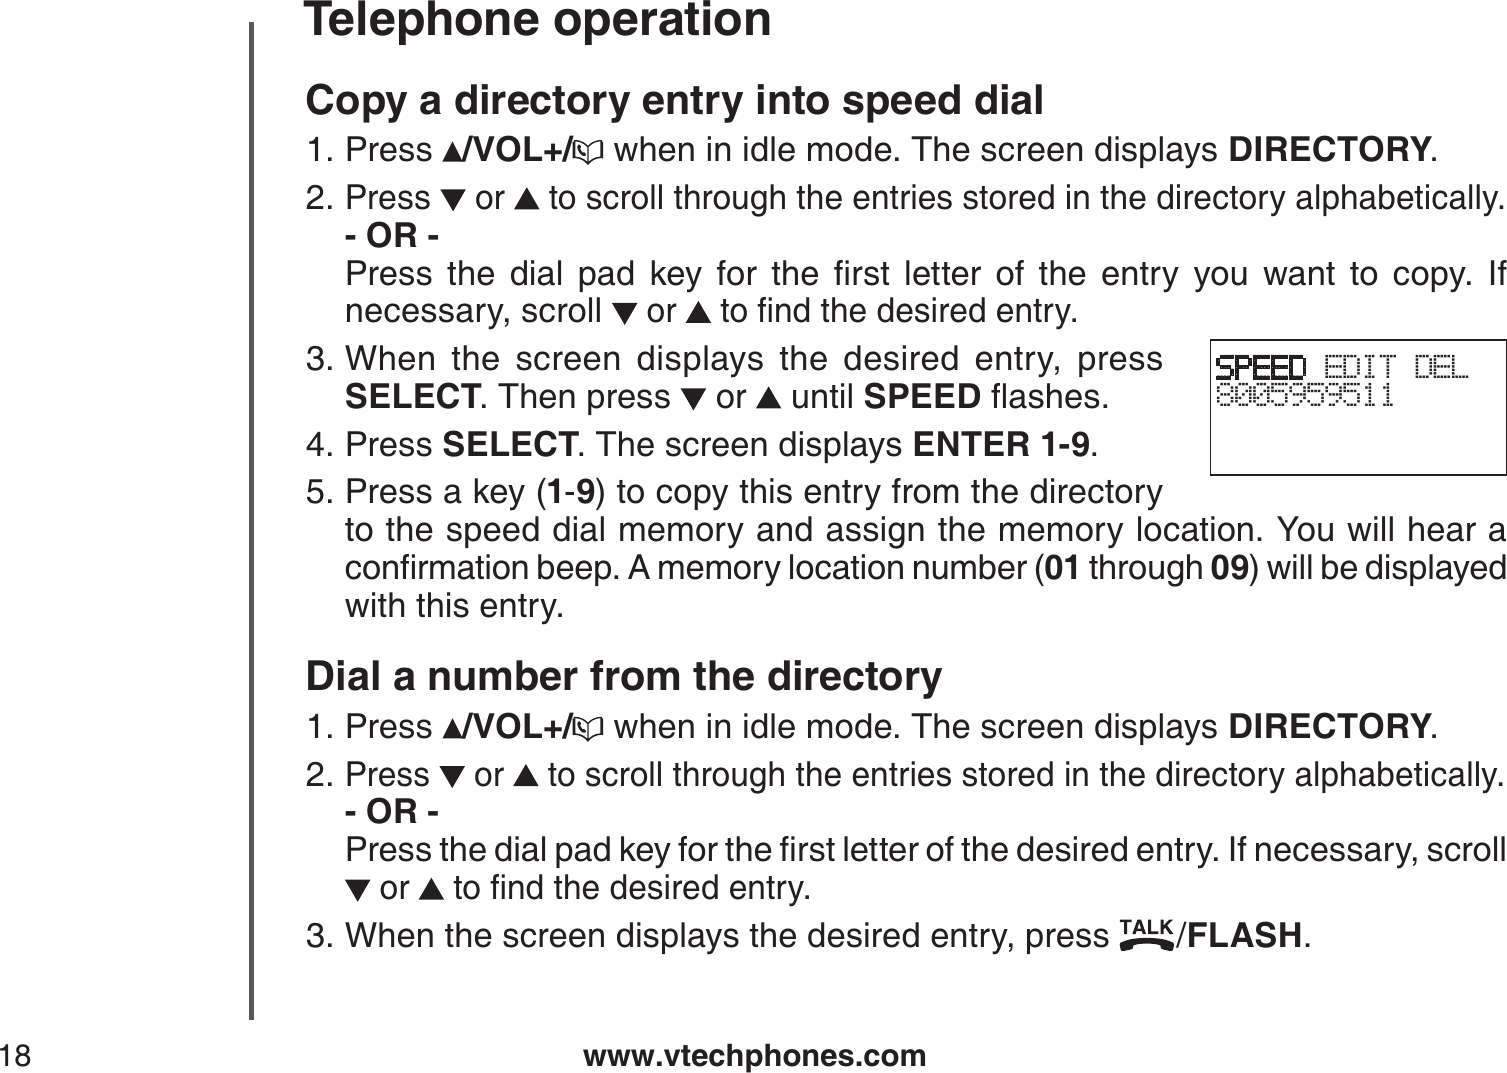 www.vtechphones.com18Telephone operationCopy a directory entry into speed dialPress  /VOL+/  when in idle mode. The screen displays DIRECTORY.Press or   to scroll through the entries stored in the directory alphabetically.- OR -         2TGUU VJG FKCN RCF MG[ HQT VJG ſTUV NGVVGT QH VJG GPVT[ [QW YCPV VQ EQR[ +Hnecessary, scroll  or  VQſPFVJGFGUKTGFGPVT[When the screen displays the desired entry, press SELECT. Then press   or   until SPEEDƀCUJGUPress SELECT. The screen displays ENTER 1-9.Press a key (1-9) to copy this entry from the directory to the speed dial memory and assign the memory location. You will hear a EQPſTOCVKQPDGGR#OGOQT[NQECVKQPPWODGT01 through 09) will be displayed with this entry.Dial a number from the directoryPress  /VOL+/  when in idle mode. The screen displays DIRECTORY.Press   or   to scroll through the entries stored in the directory alphabetically.- OR -          2TGUUVJGFKCNRCFMG[HQTVJGſTUVNGVVGTQHVJGFGUKTGFGPVT[+HPGEGUUCT[UETQNN or  VQſPFVJGFGUKTGFGPVT[When the screen displays the desired entry, press  /FLASH.1.2.3.4.5.1.2.3.SPEED EDIT DEL8005959511